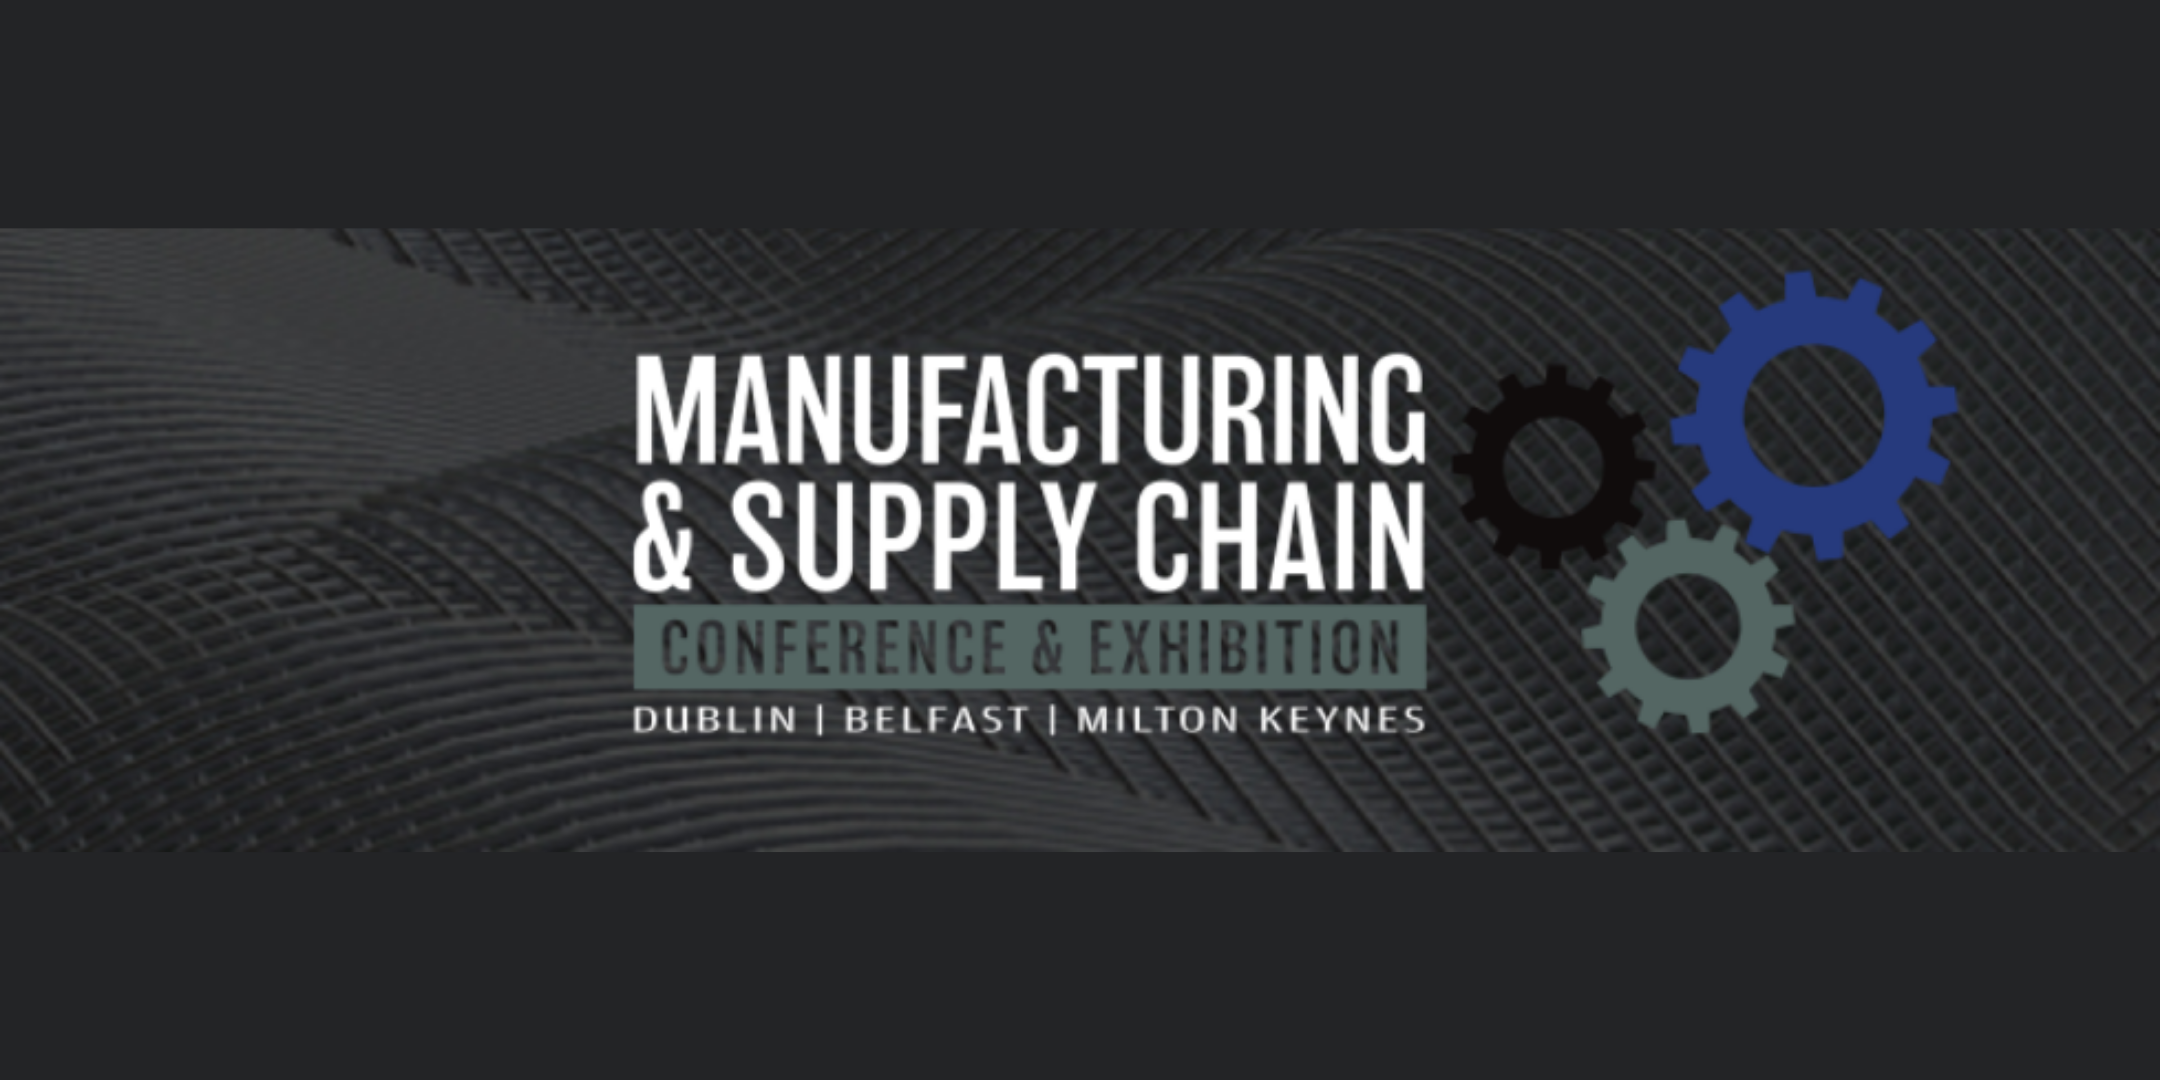 UK Manufacturing & Supply Chain Conference & Exhibition - 23 SEP 2021